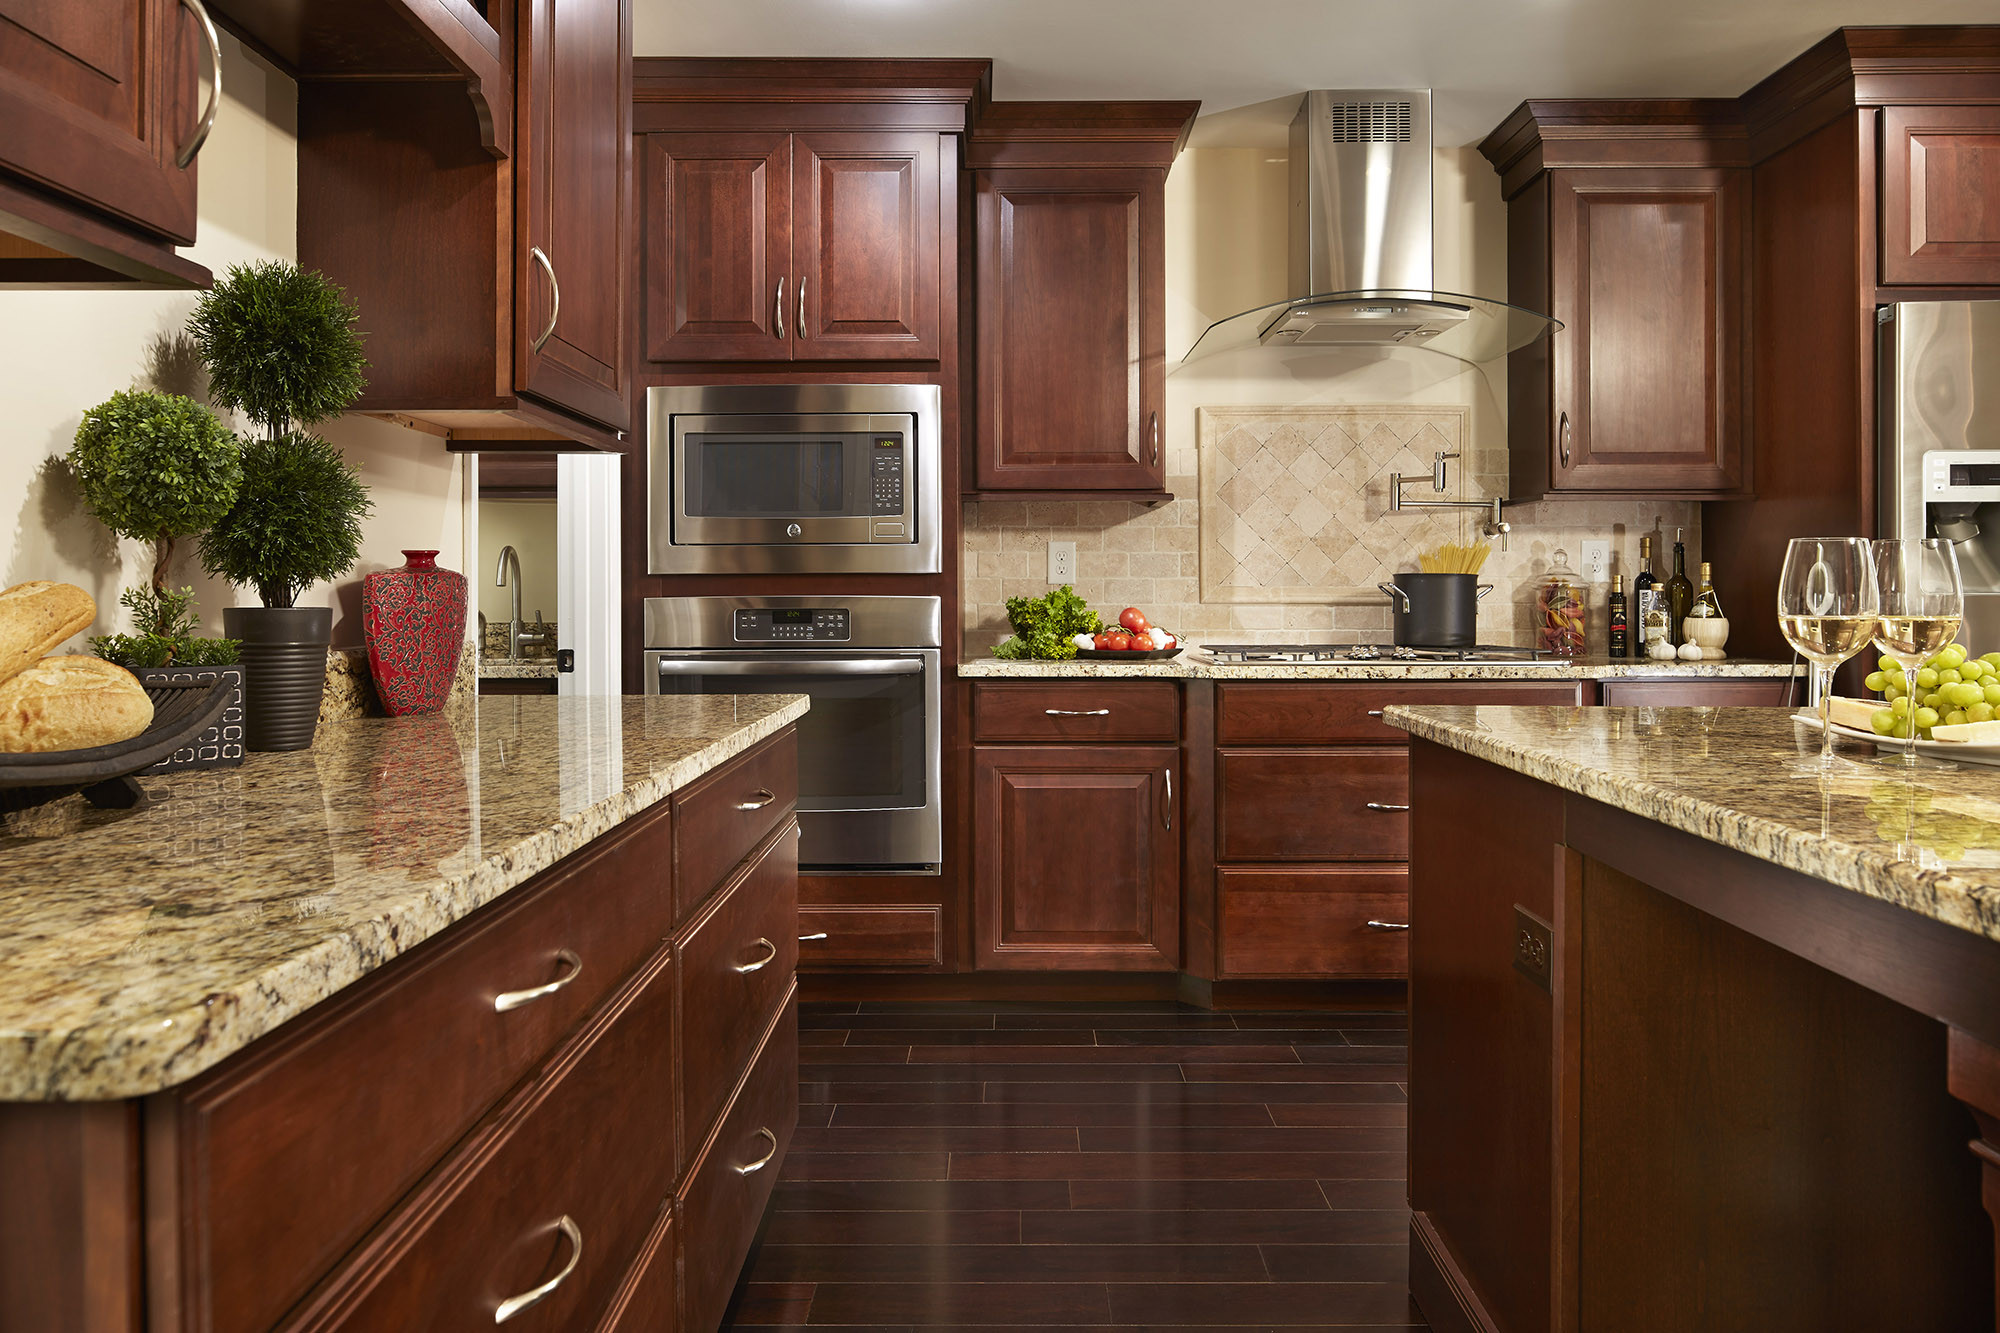 Kitchen Cabinets Remodel Ideas
 Kitchen Design Ideas Remodel Projects & s